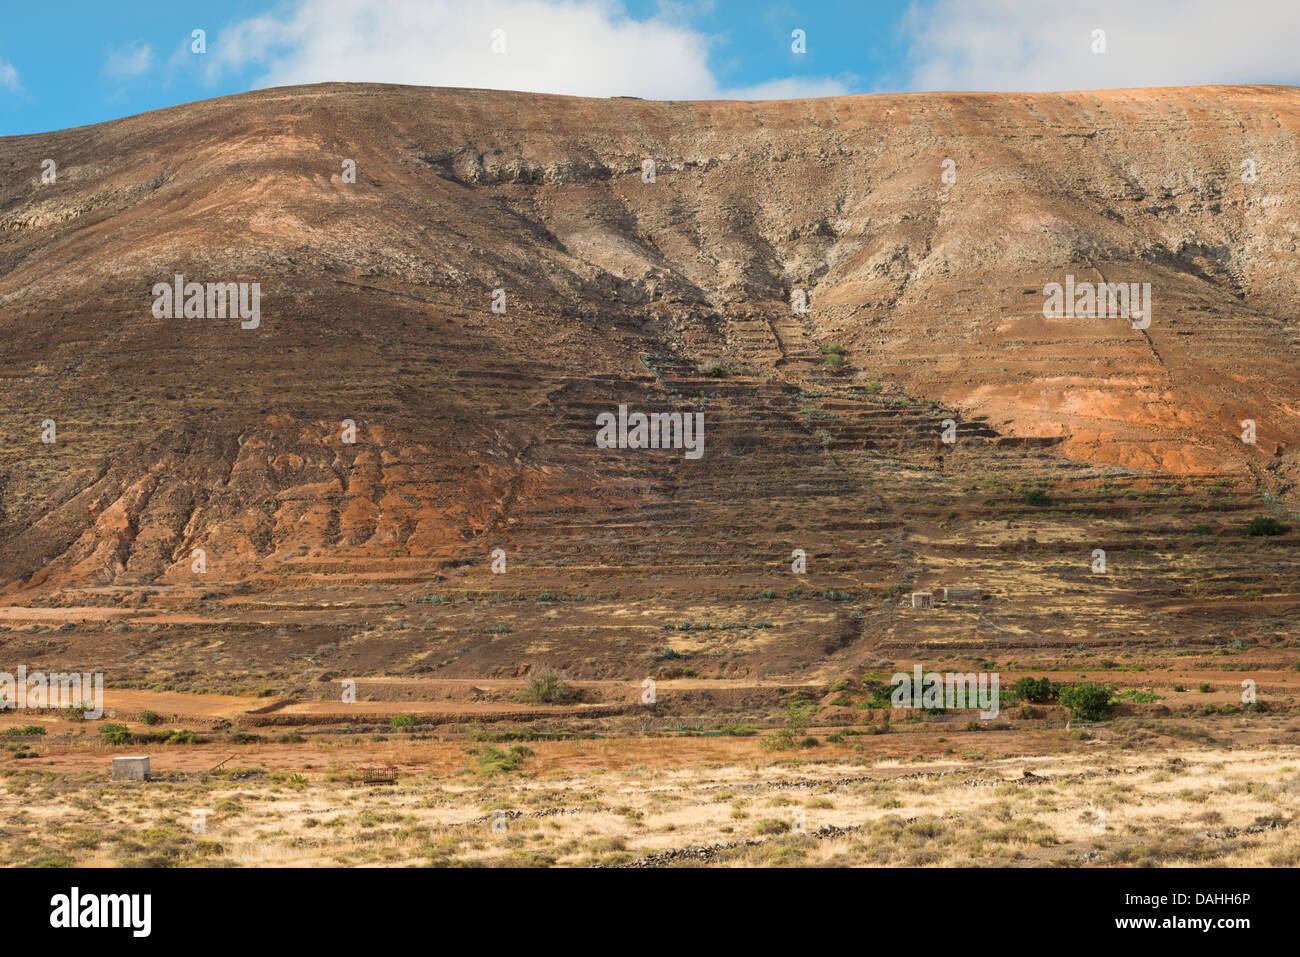 Agricultural terraces and debris fans at Vallebron, Fuerteventura, Canary Islands, Spain Stock Photo